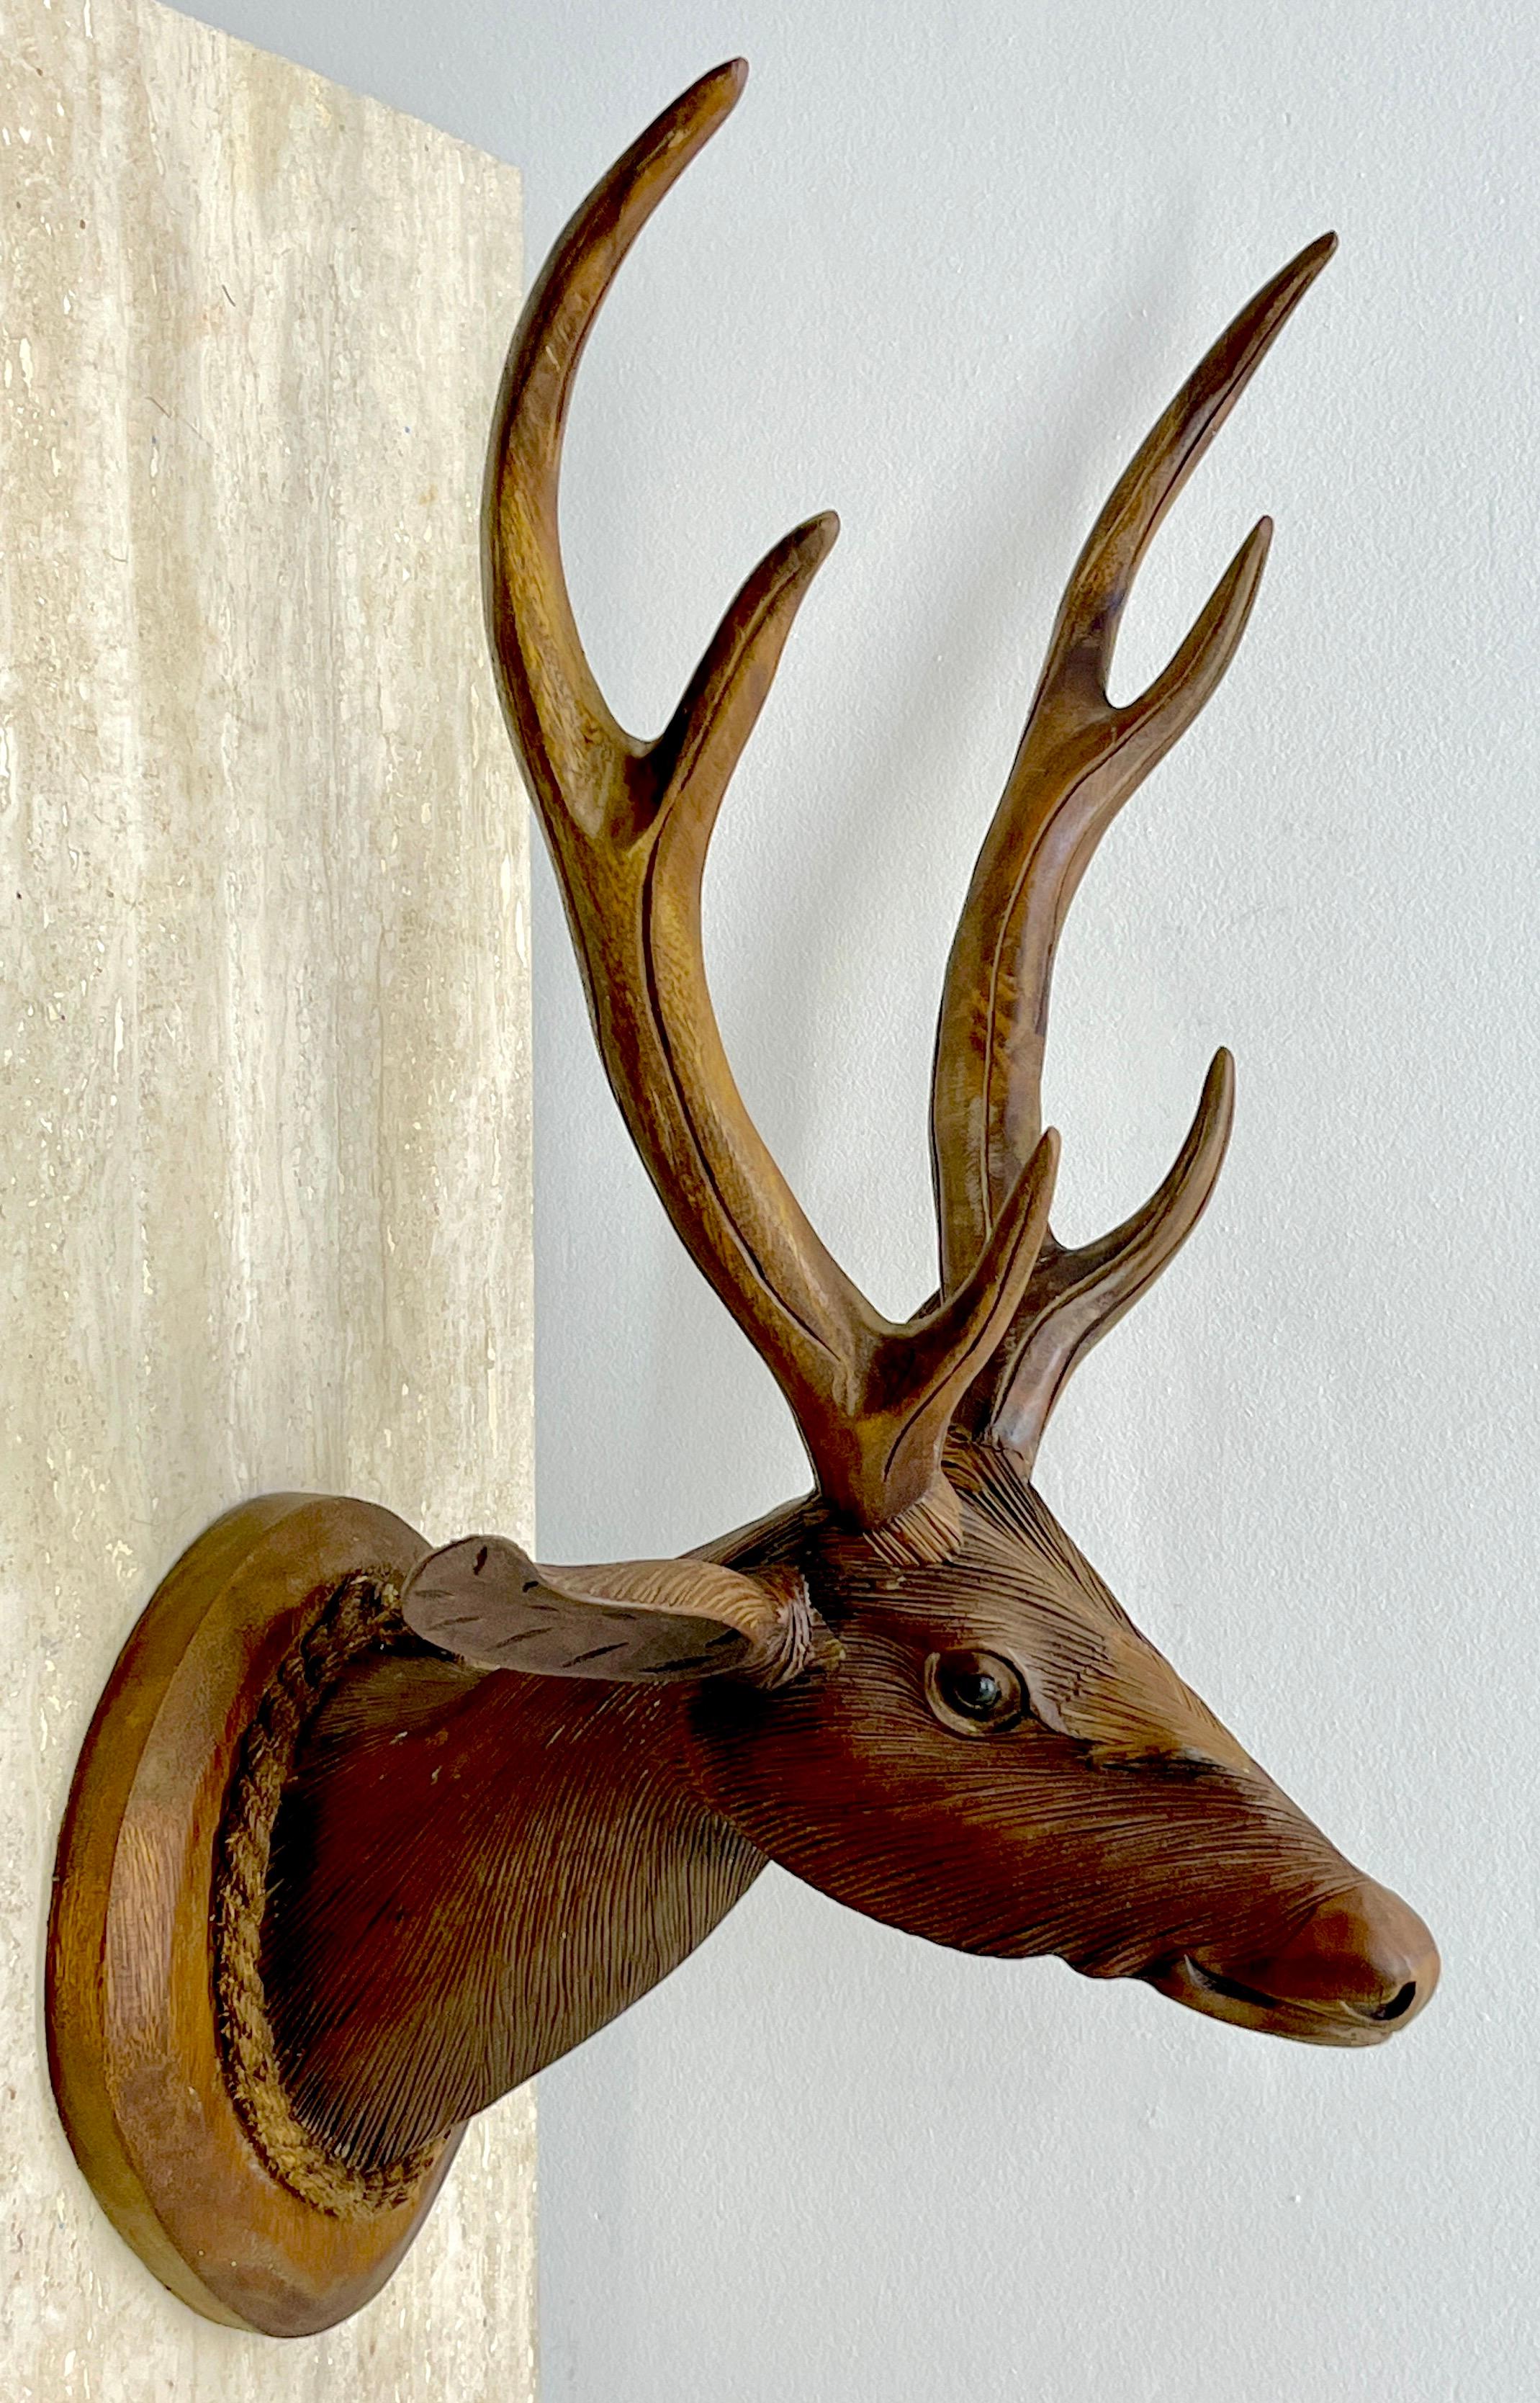 Modern Black Forrest Carved Walnut 6 -Point Deer Shoulder Mount
Switzerland, Circa 1960s

Enhance your space with the timeless elegance of this Modern Black Forest Carved Walnut 6-Point Deer Shoulder Mount. Originating from Switzerland and dating